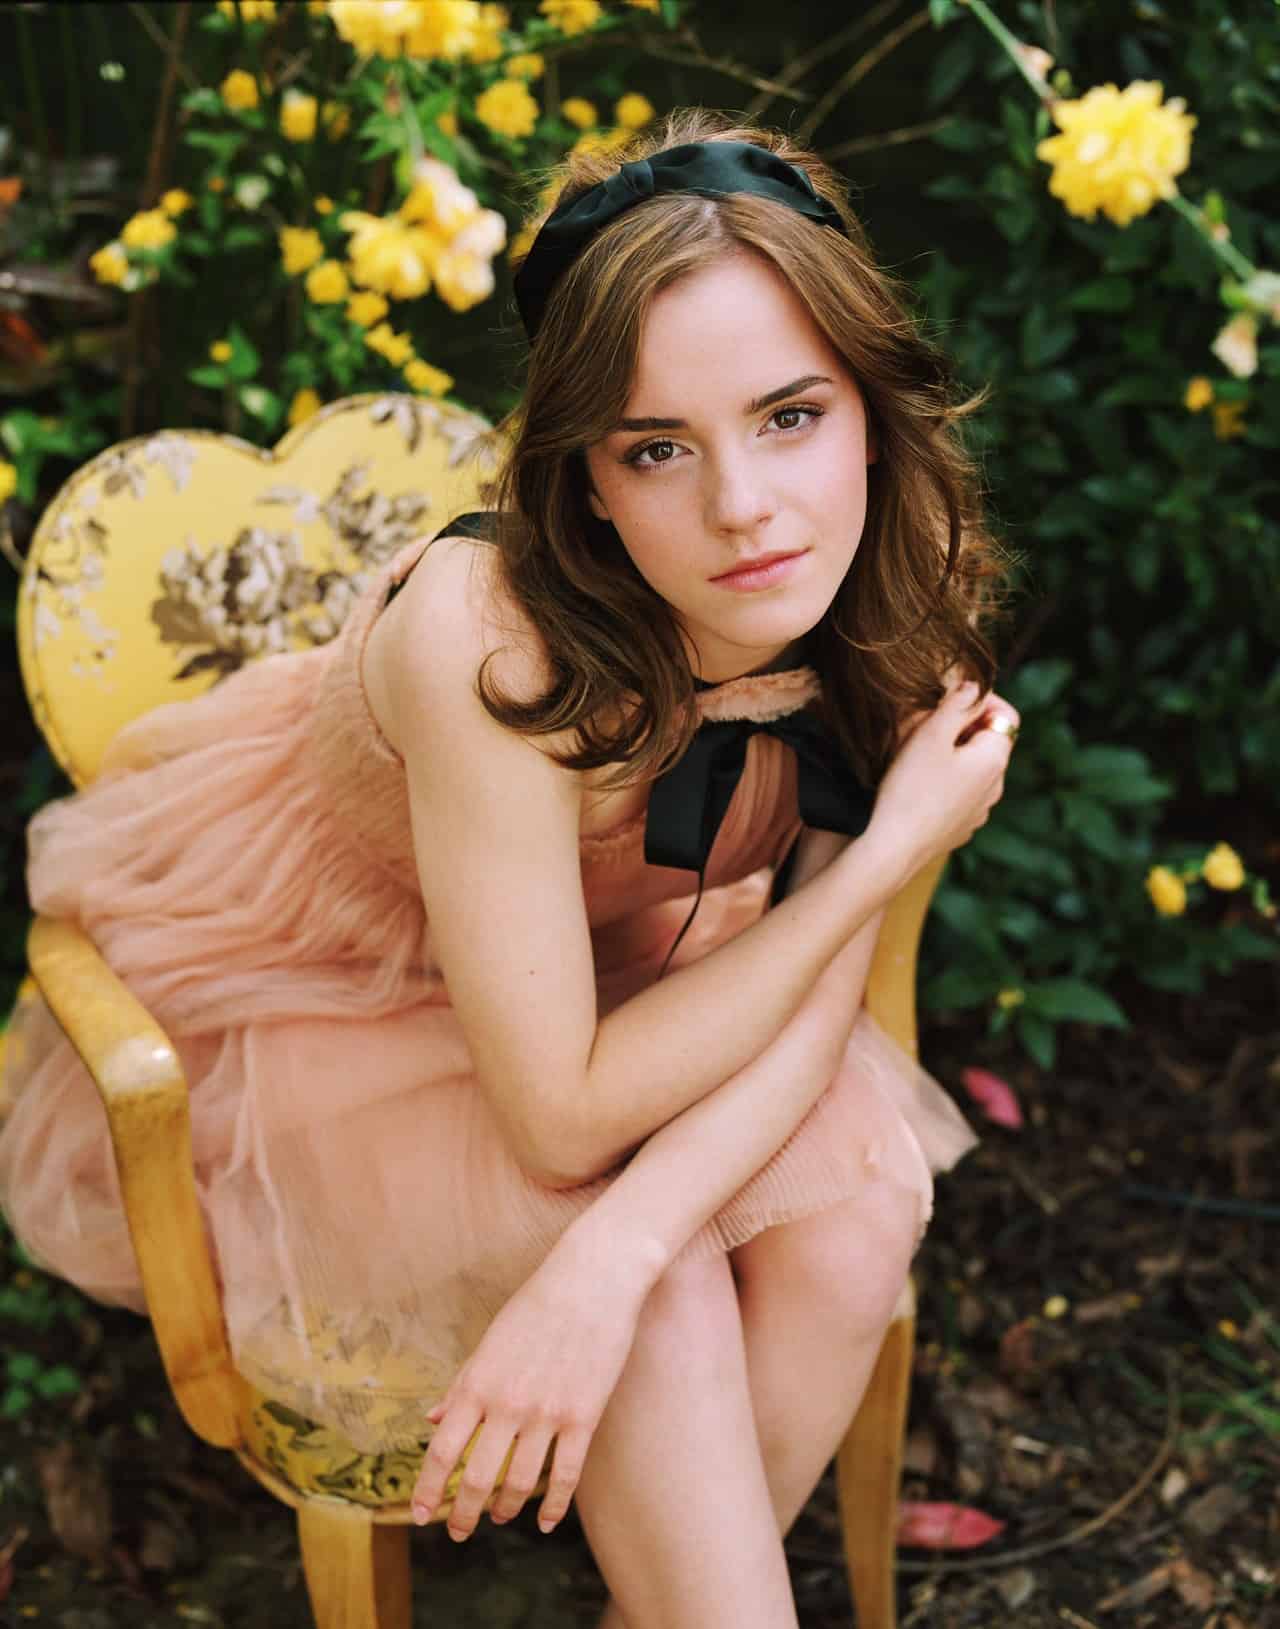 Emma Watson's Natural Beauty Is on Full Display in Bravo Magazine Spread